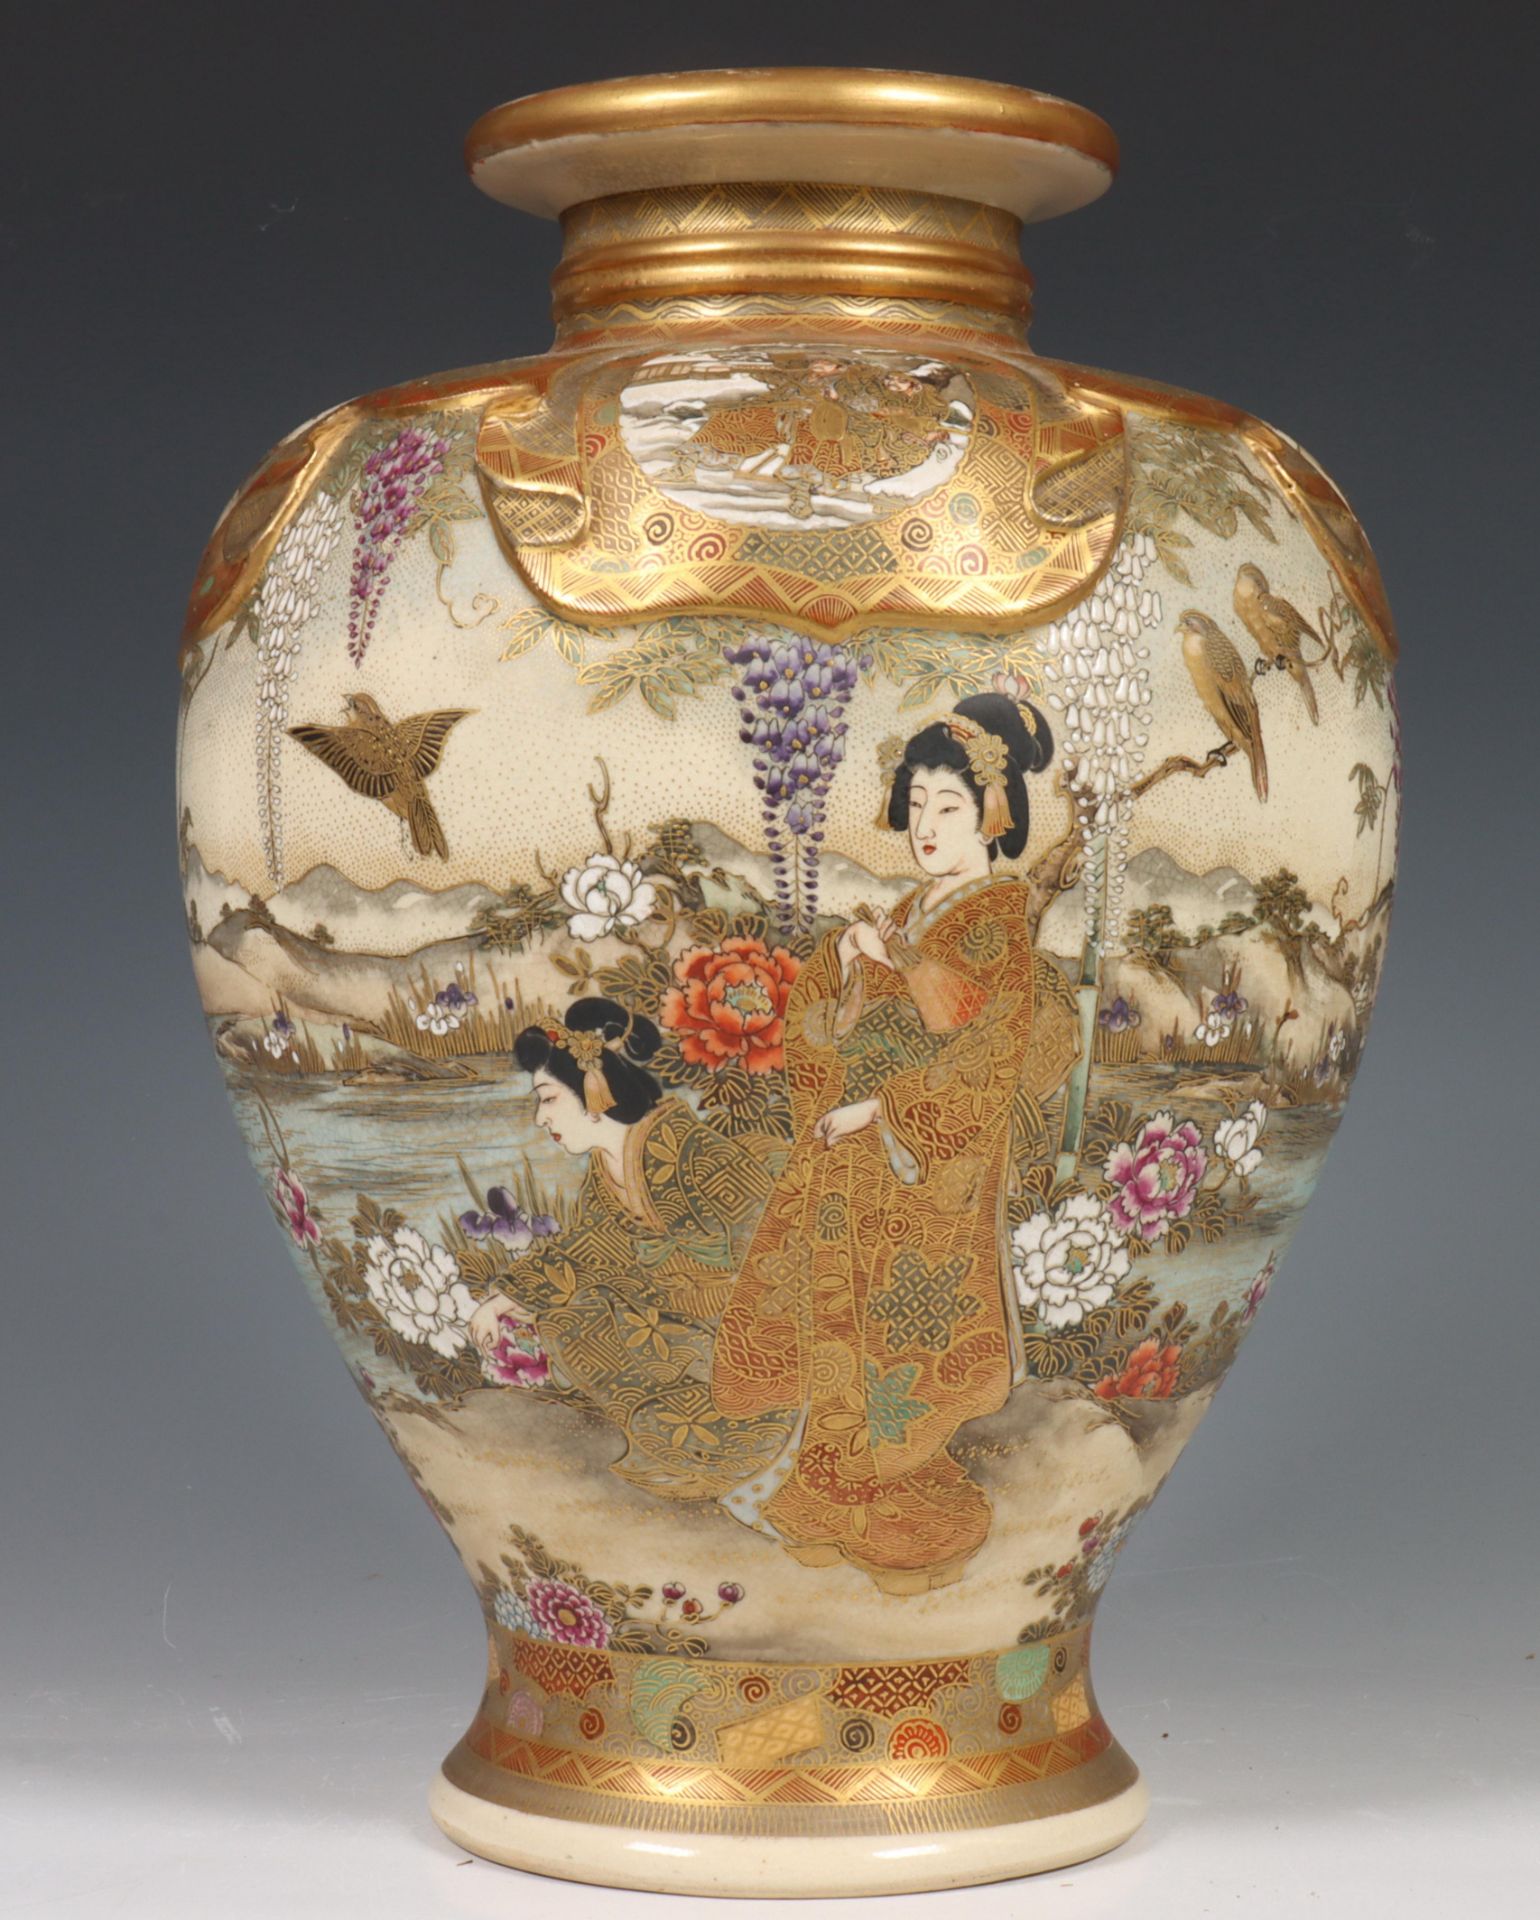 Japan, Satsuma porcelain vase, late 19th century, decorated with elegant ladies in a flower garden